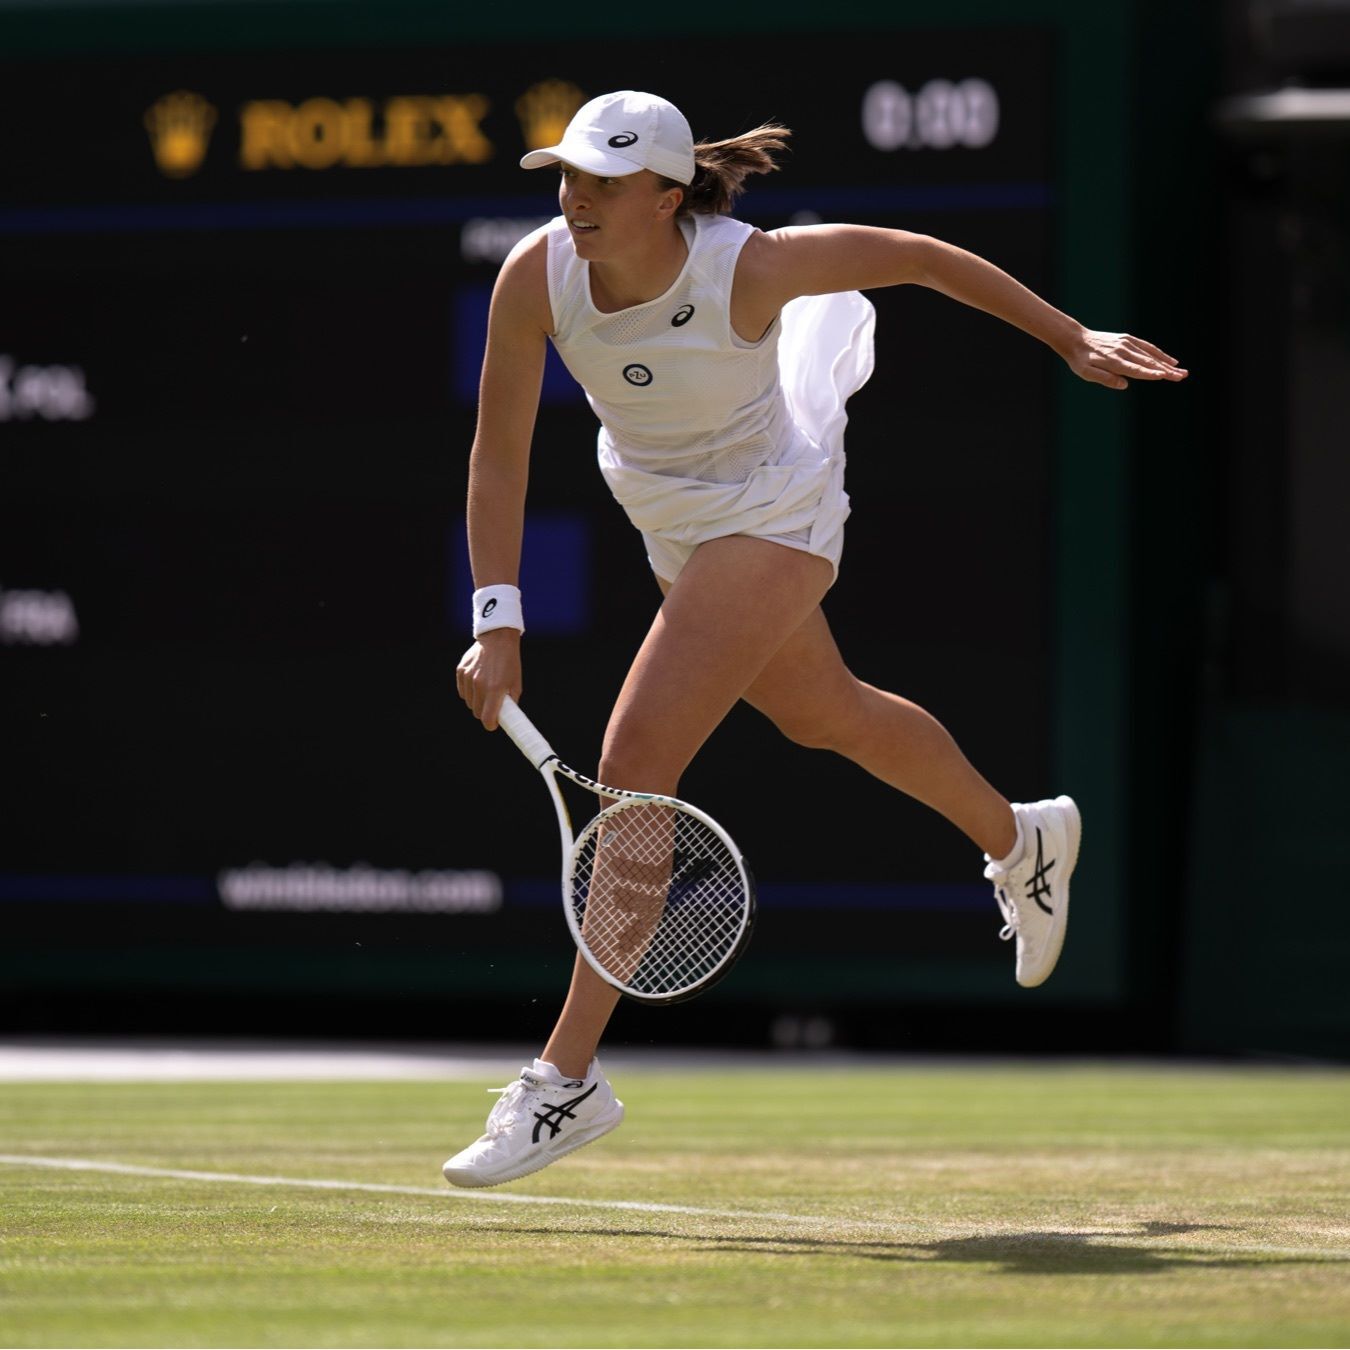 Professional tennis player in a white dress returns a volley at Wimbledon